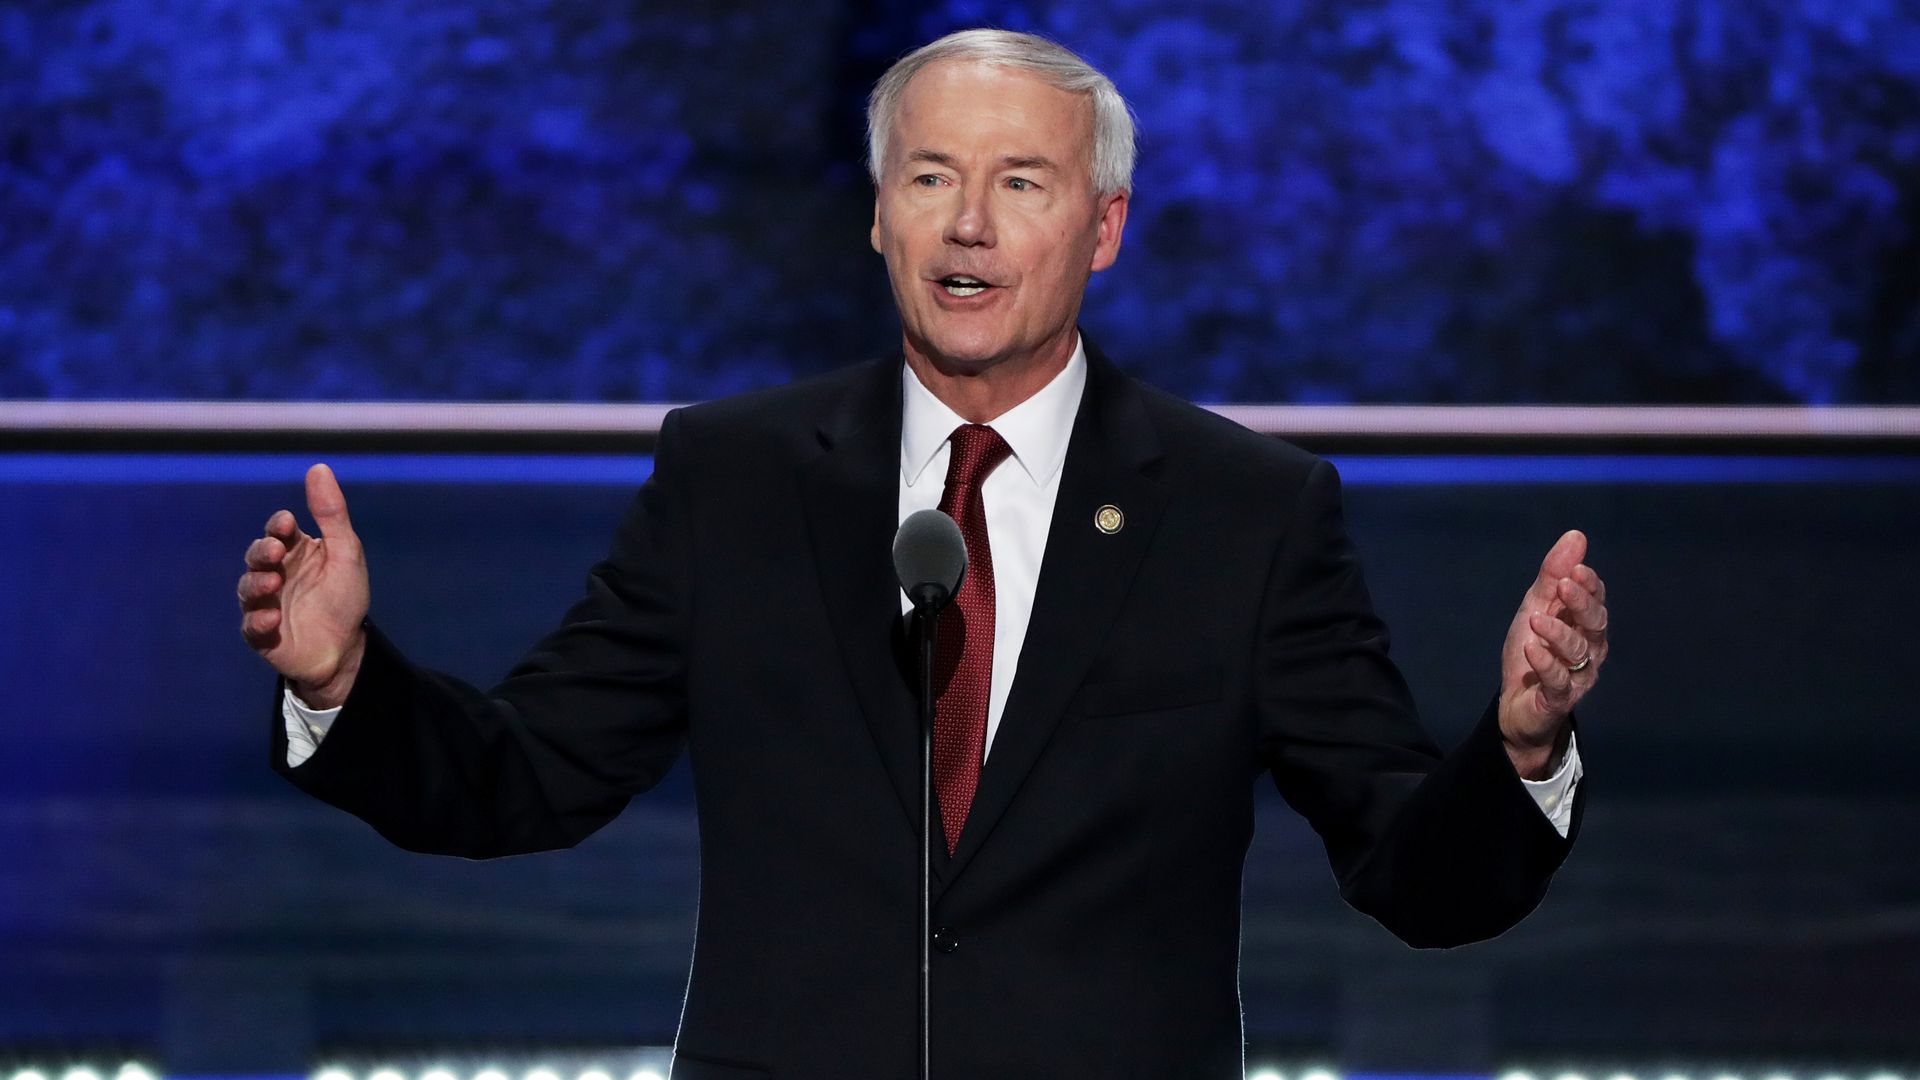 Gov. Asa Hutchinson wears a suit while gesturing